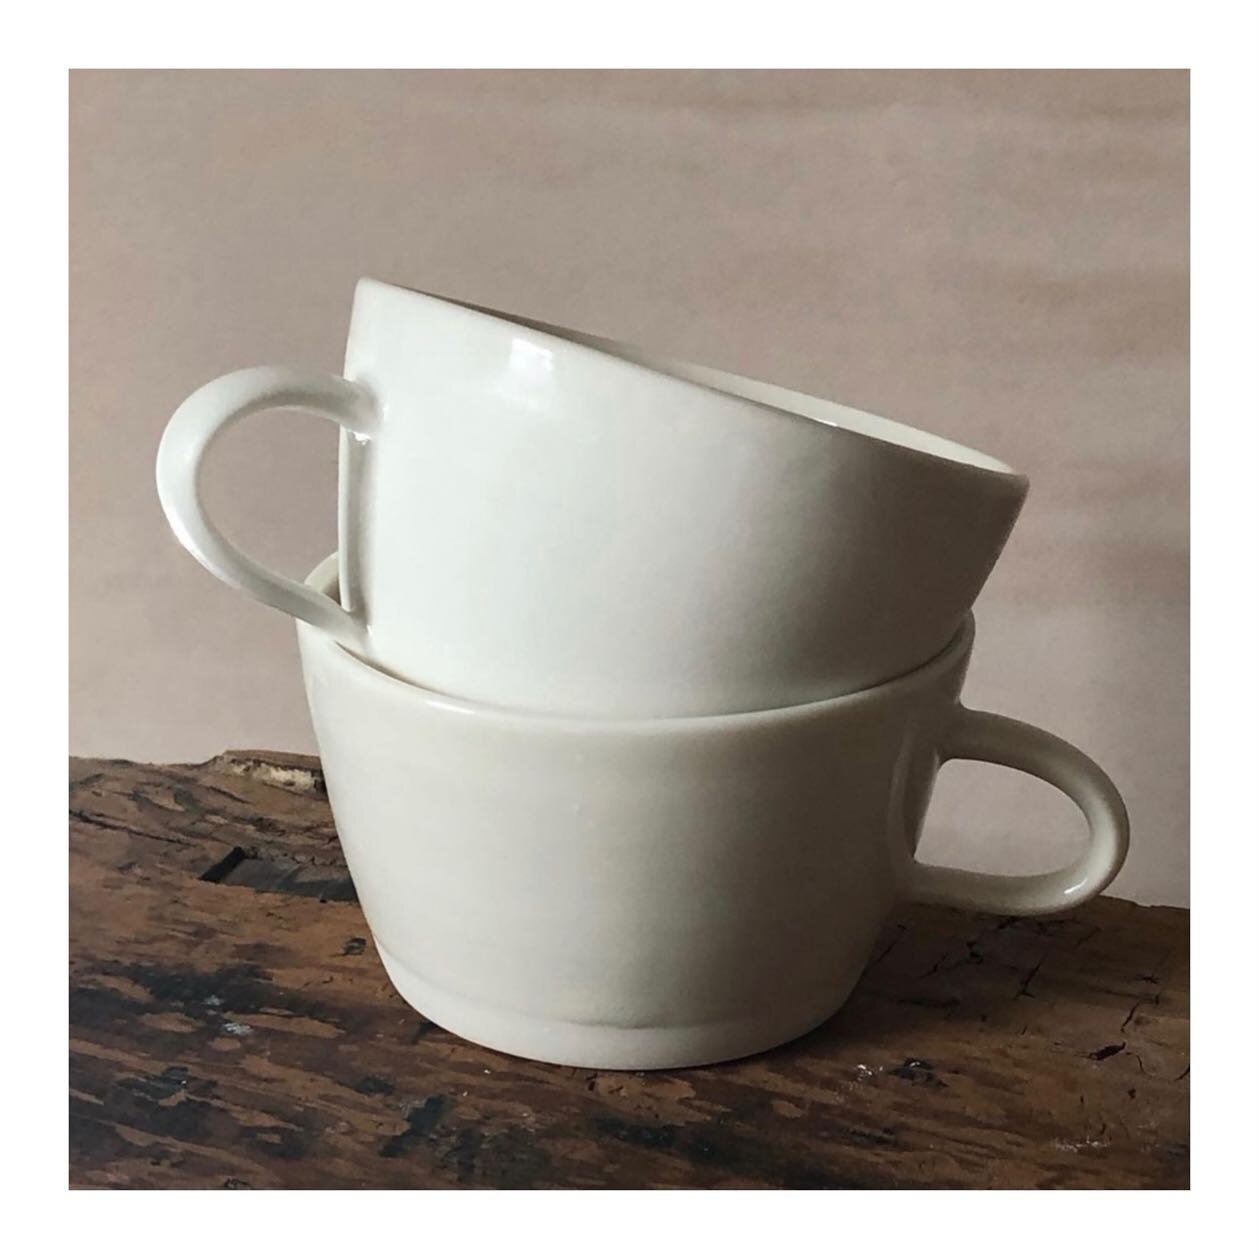 It&rsquo;s been a pleasure writing about the Wendy Wilbraham and we hope you&rsquo;ve been introduced to her, or just learnt a little more about her practise. Wendy&rsquo;s ceramics collections are designed to be functional, and eye-catching. Each pi